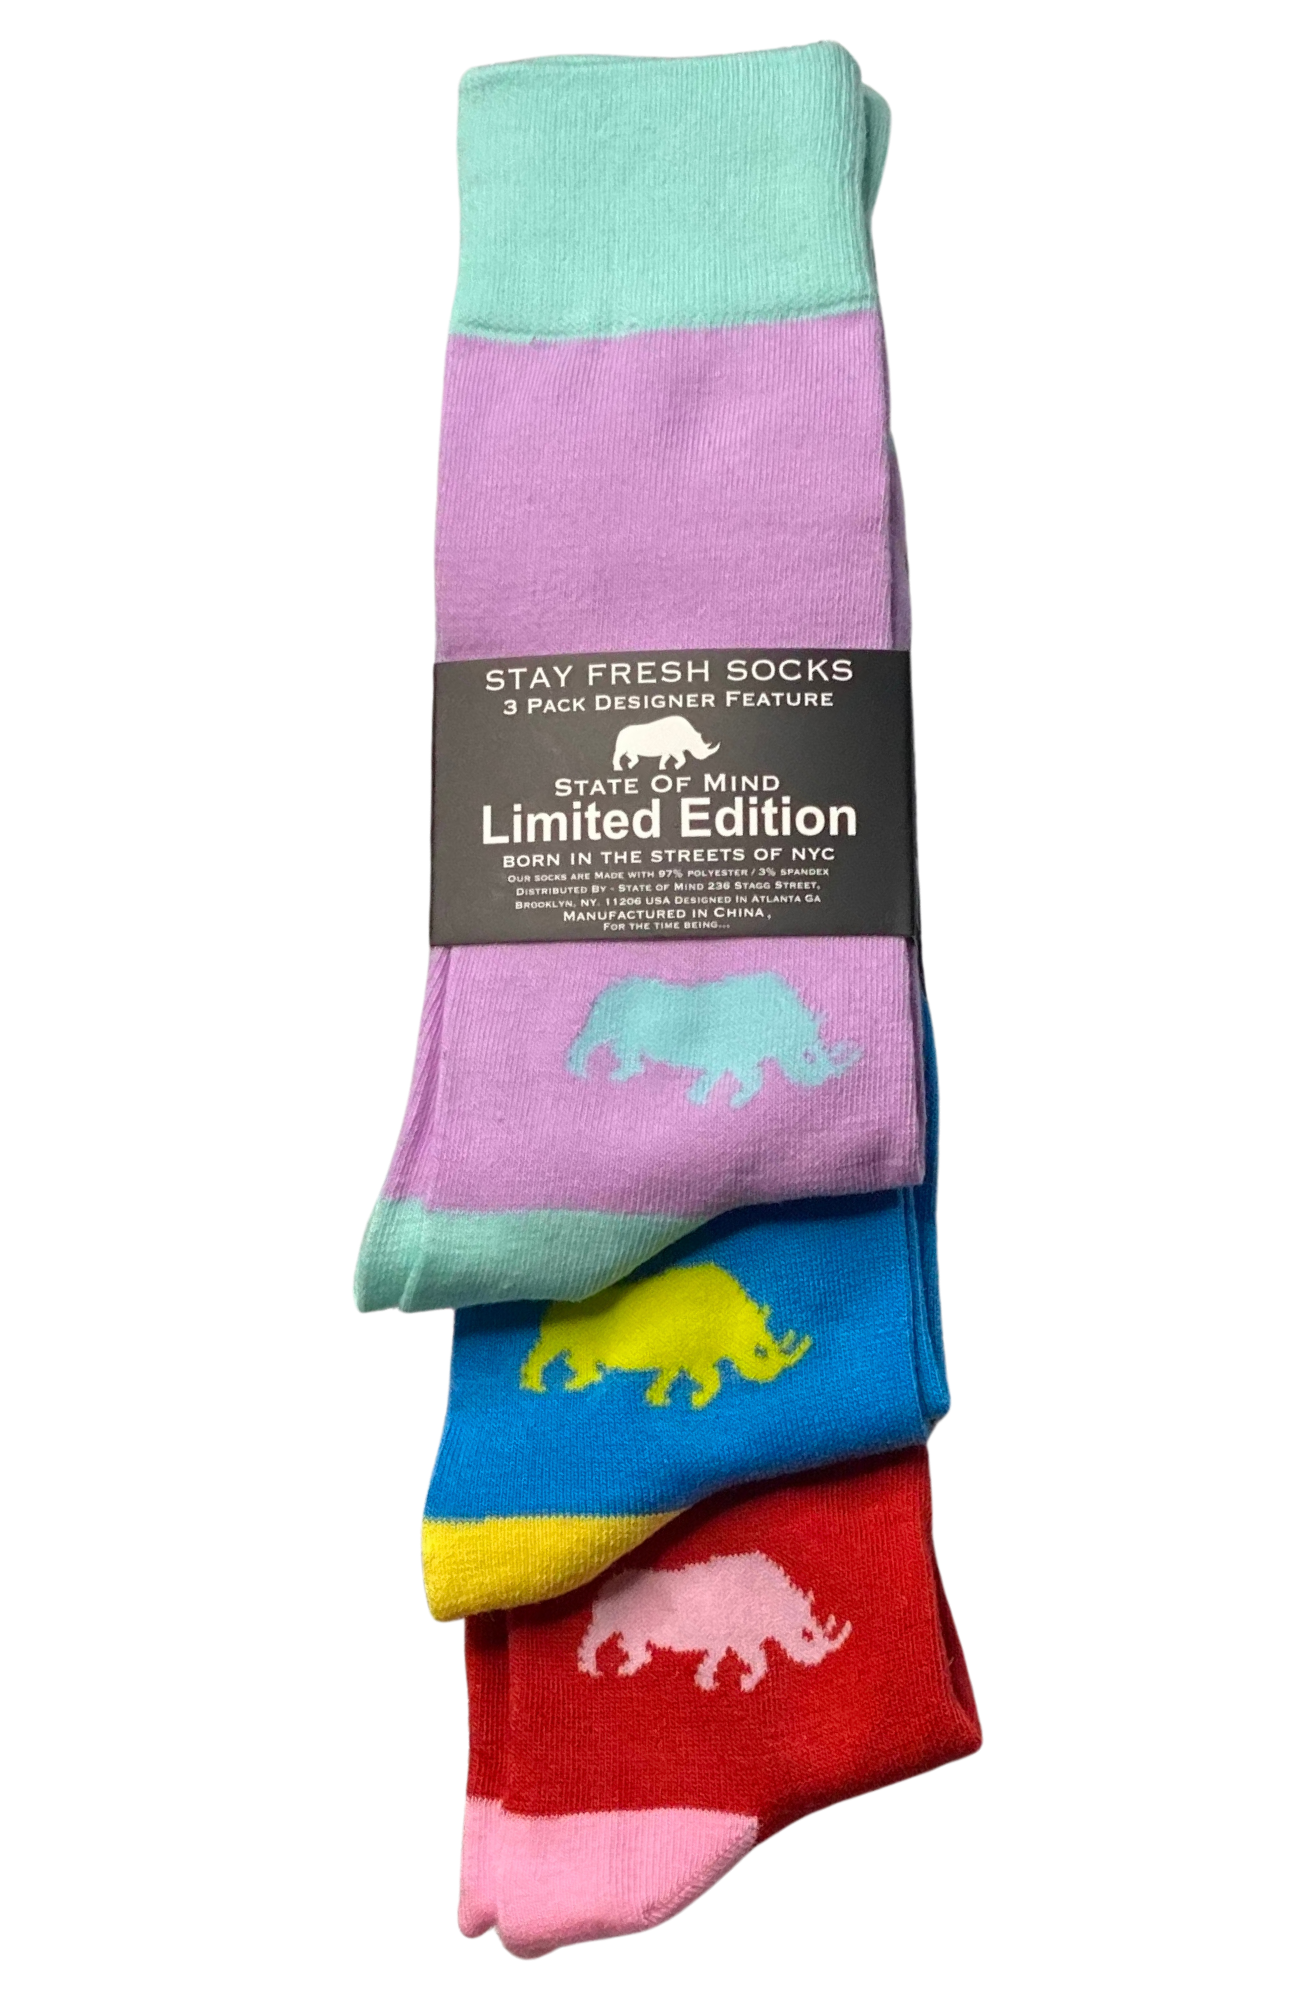 Stay Fresh 3-Pack Sock Bundle – State of Mind